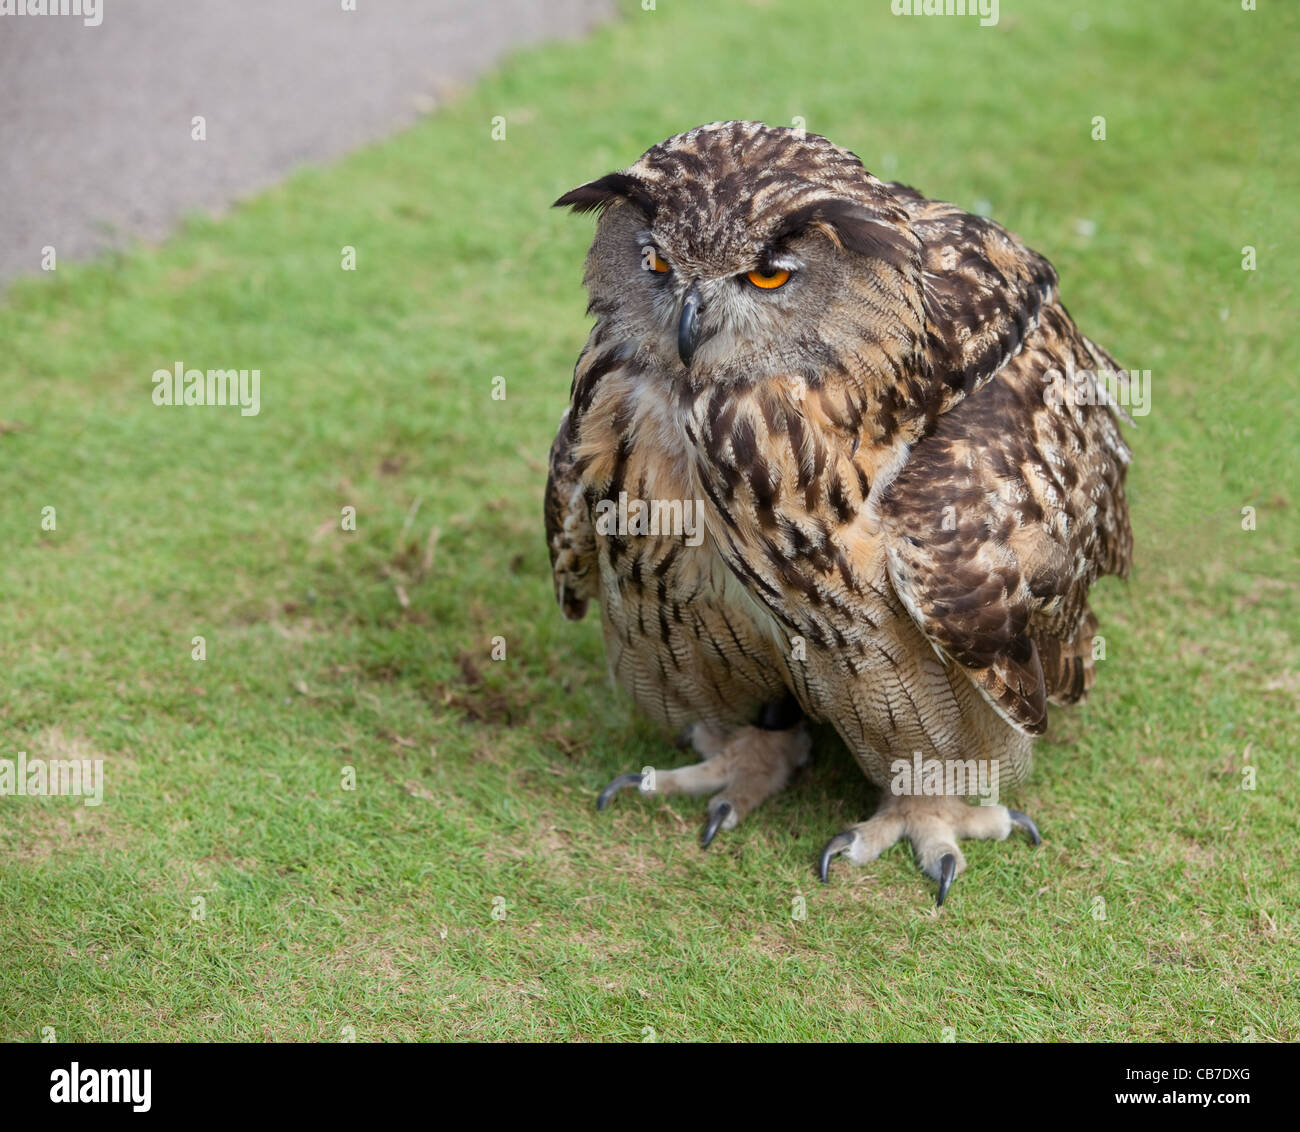 http://c8.alamy.com/comp/CB7DXG/i-hate-mornings!-a-european-eagle-owl-with-ruffled-feathers-and-looking-CB7DXG.jpg